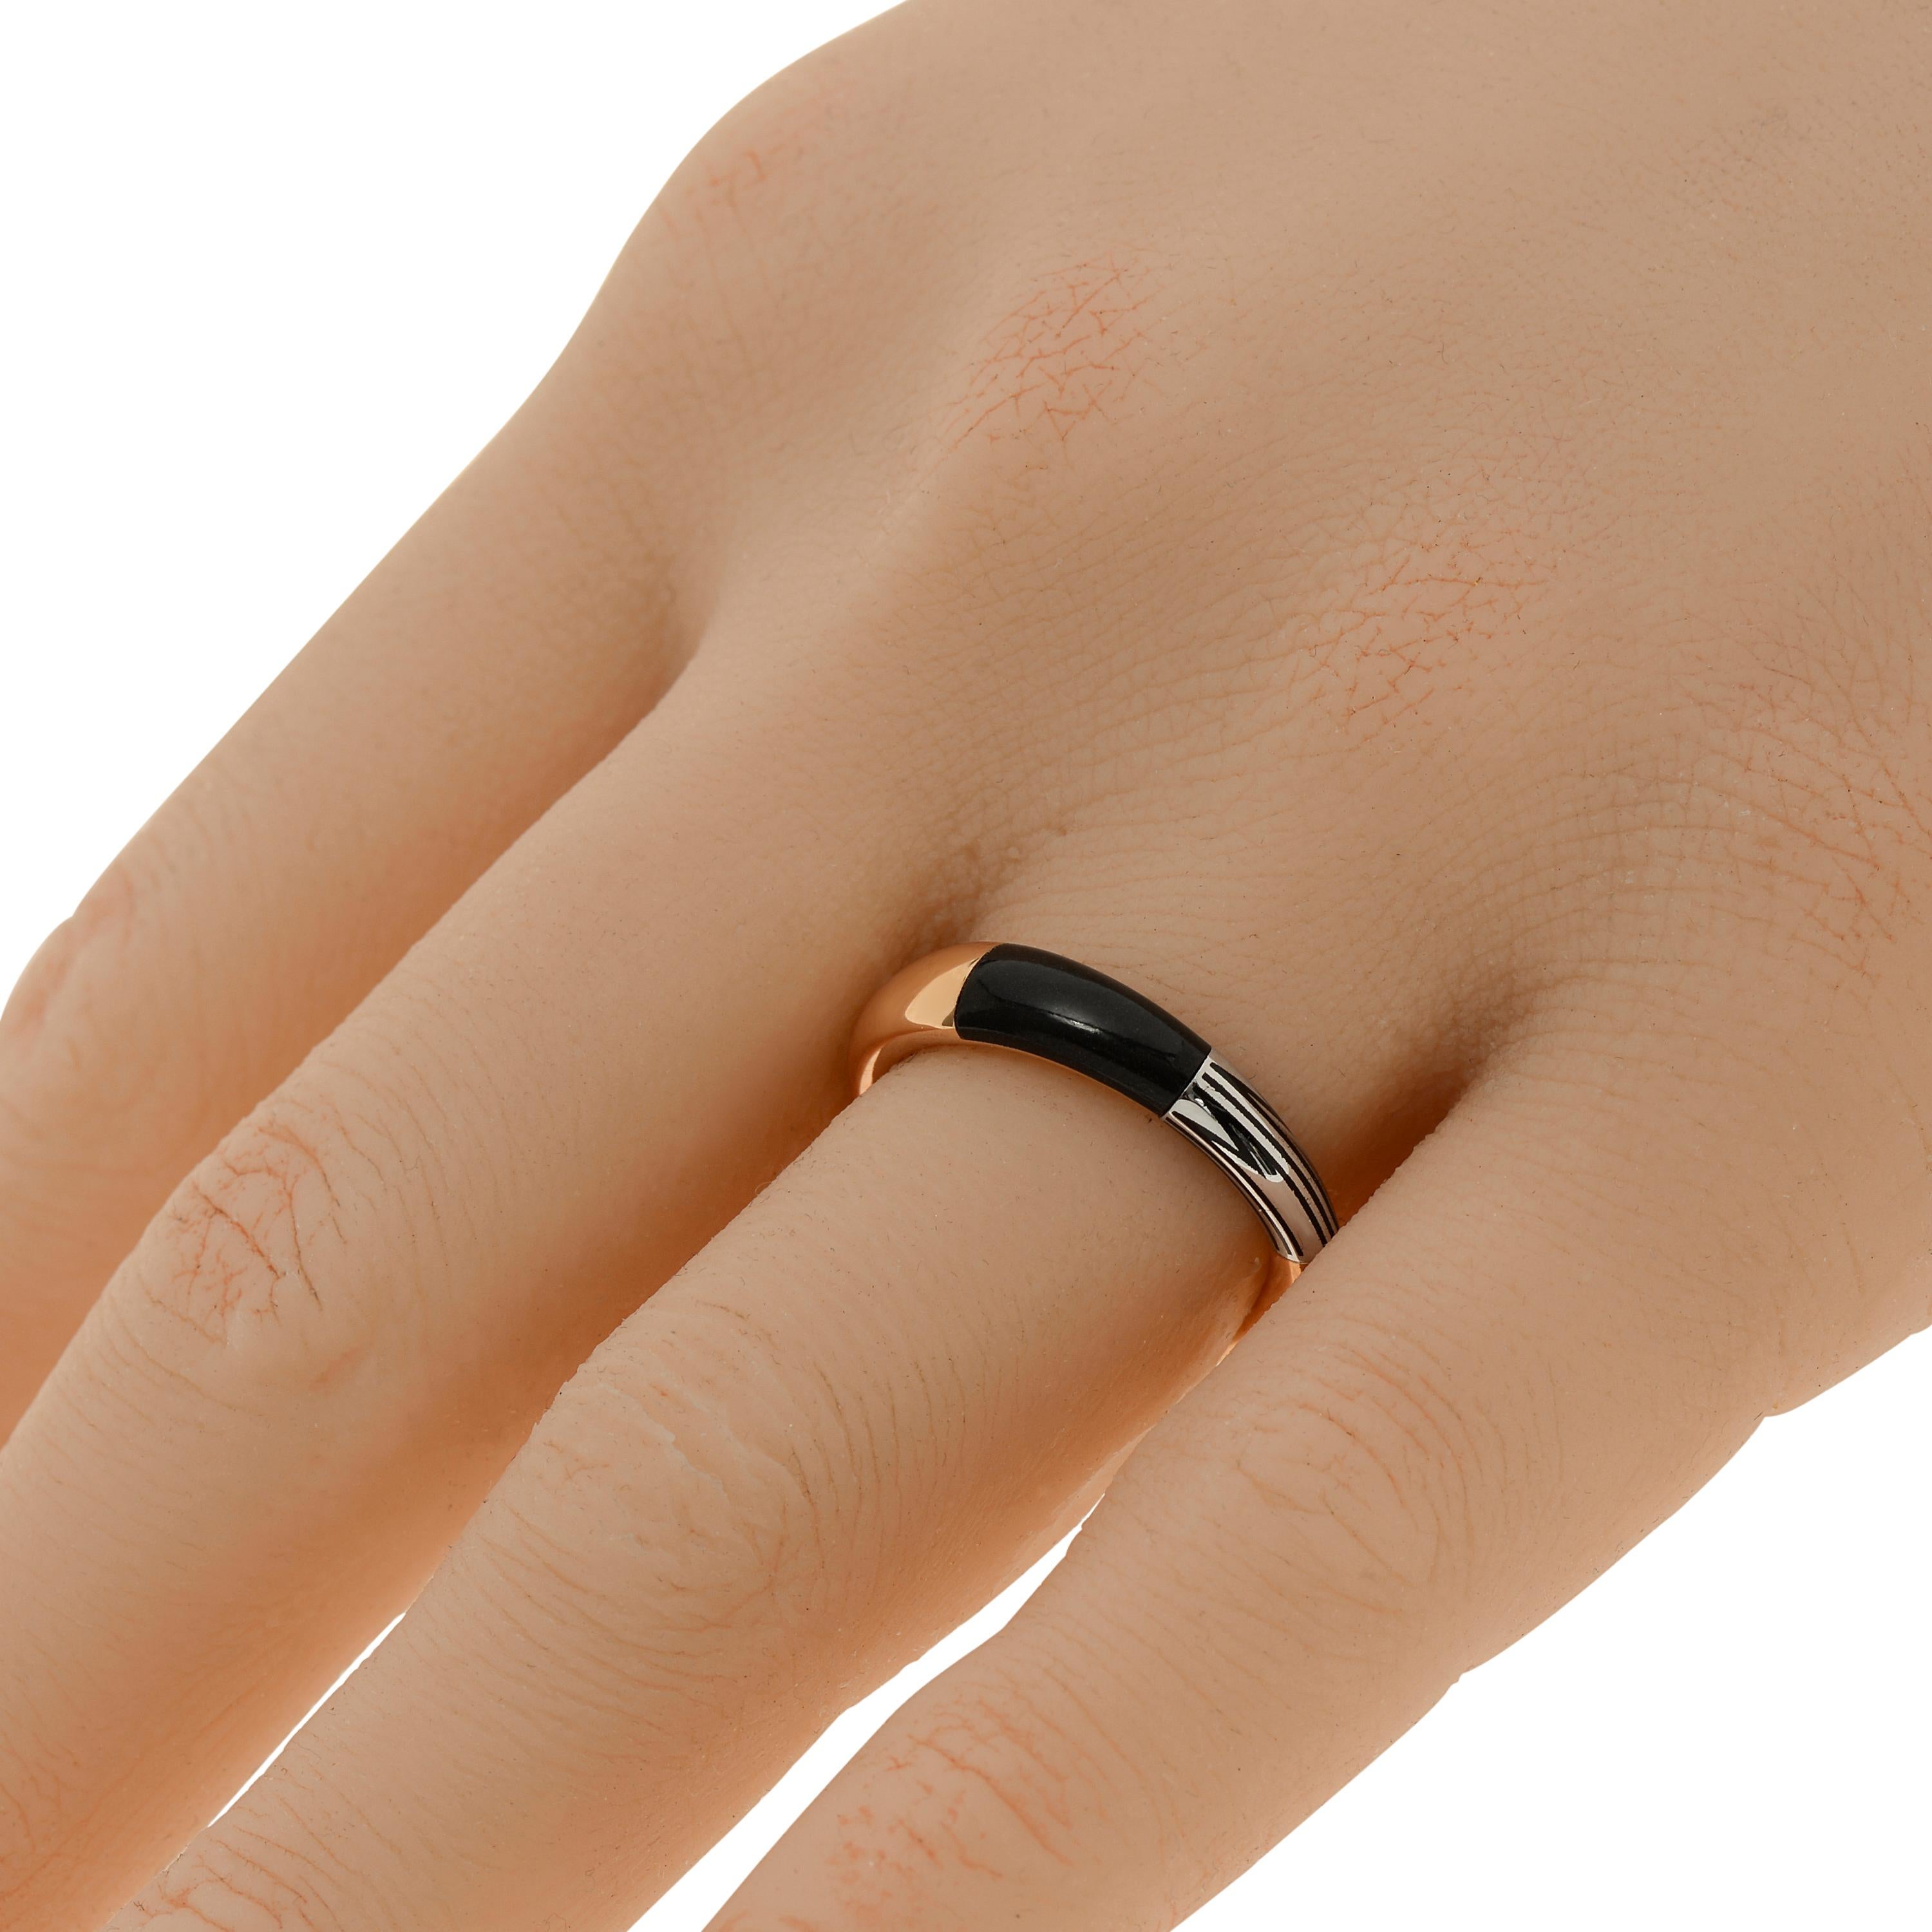 Mimi Milano 18K rose gold and 18K white gold band ring features Onyx in perfect harmony with two toned 18k Gold in an iconic design. The ring size is 7.25 (55.1). The band width is 2mm - 4.8mm. The weight is 2.92g.
